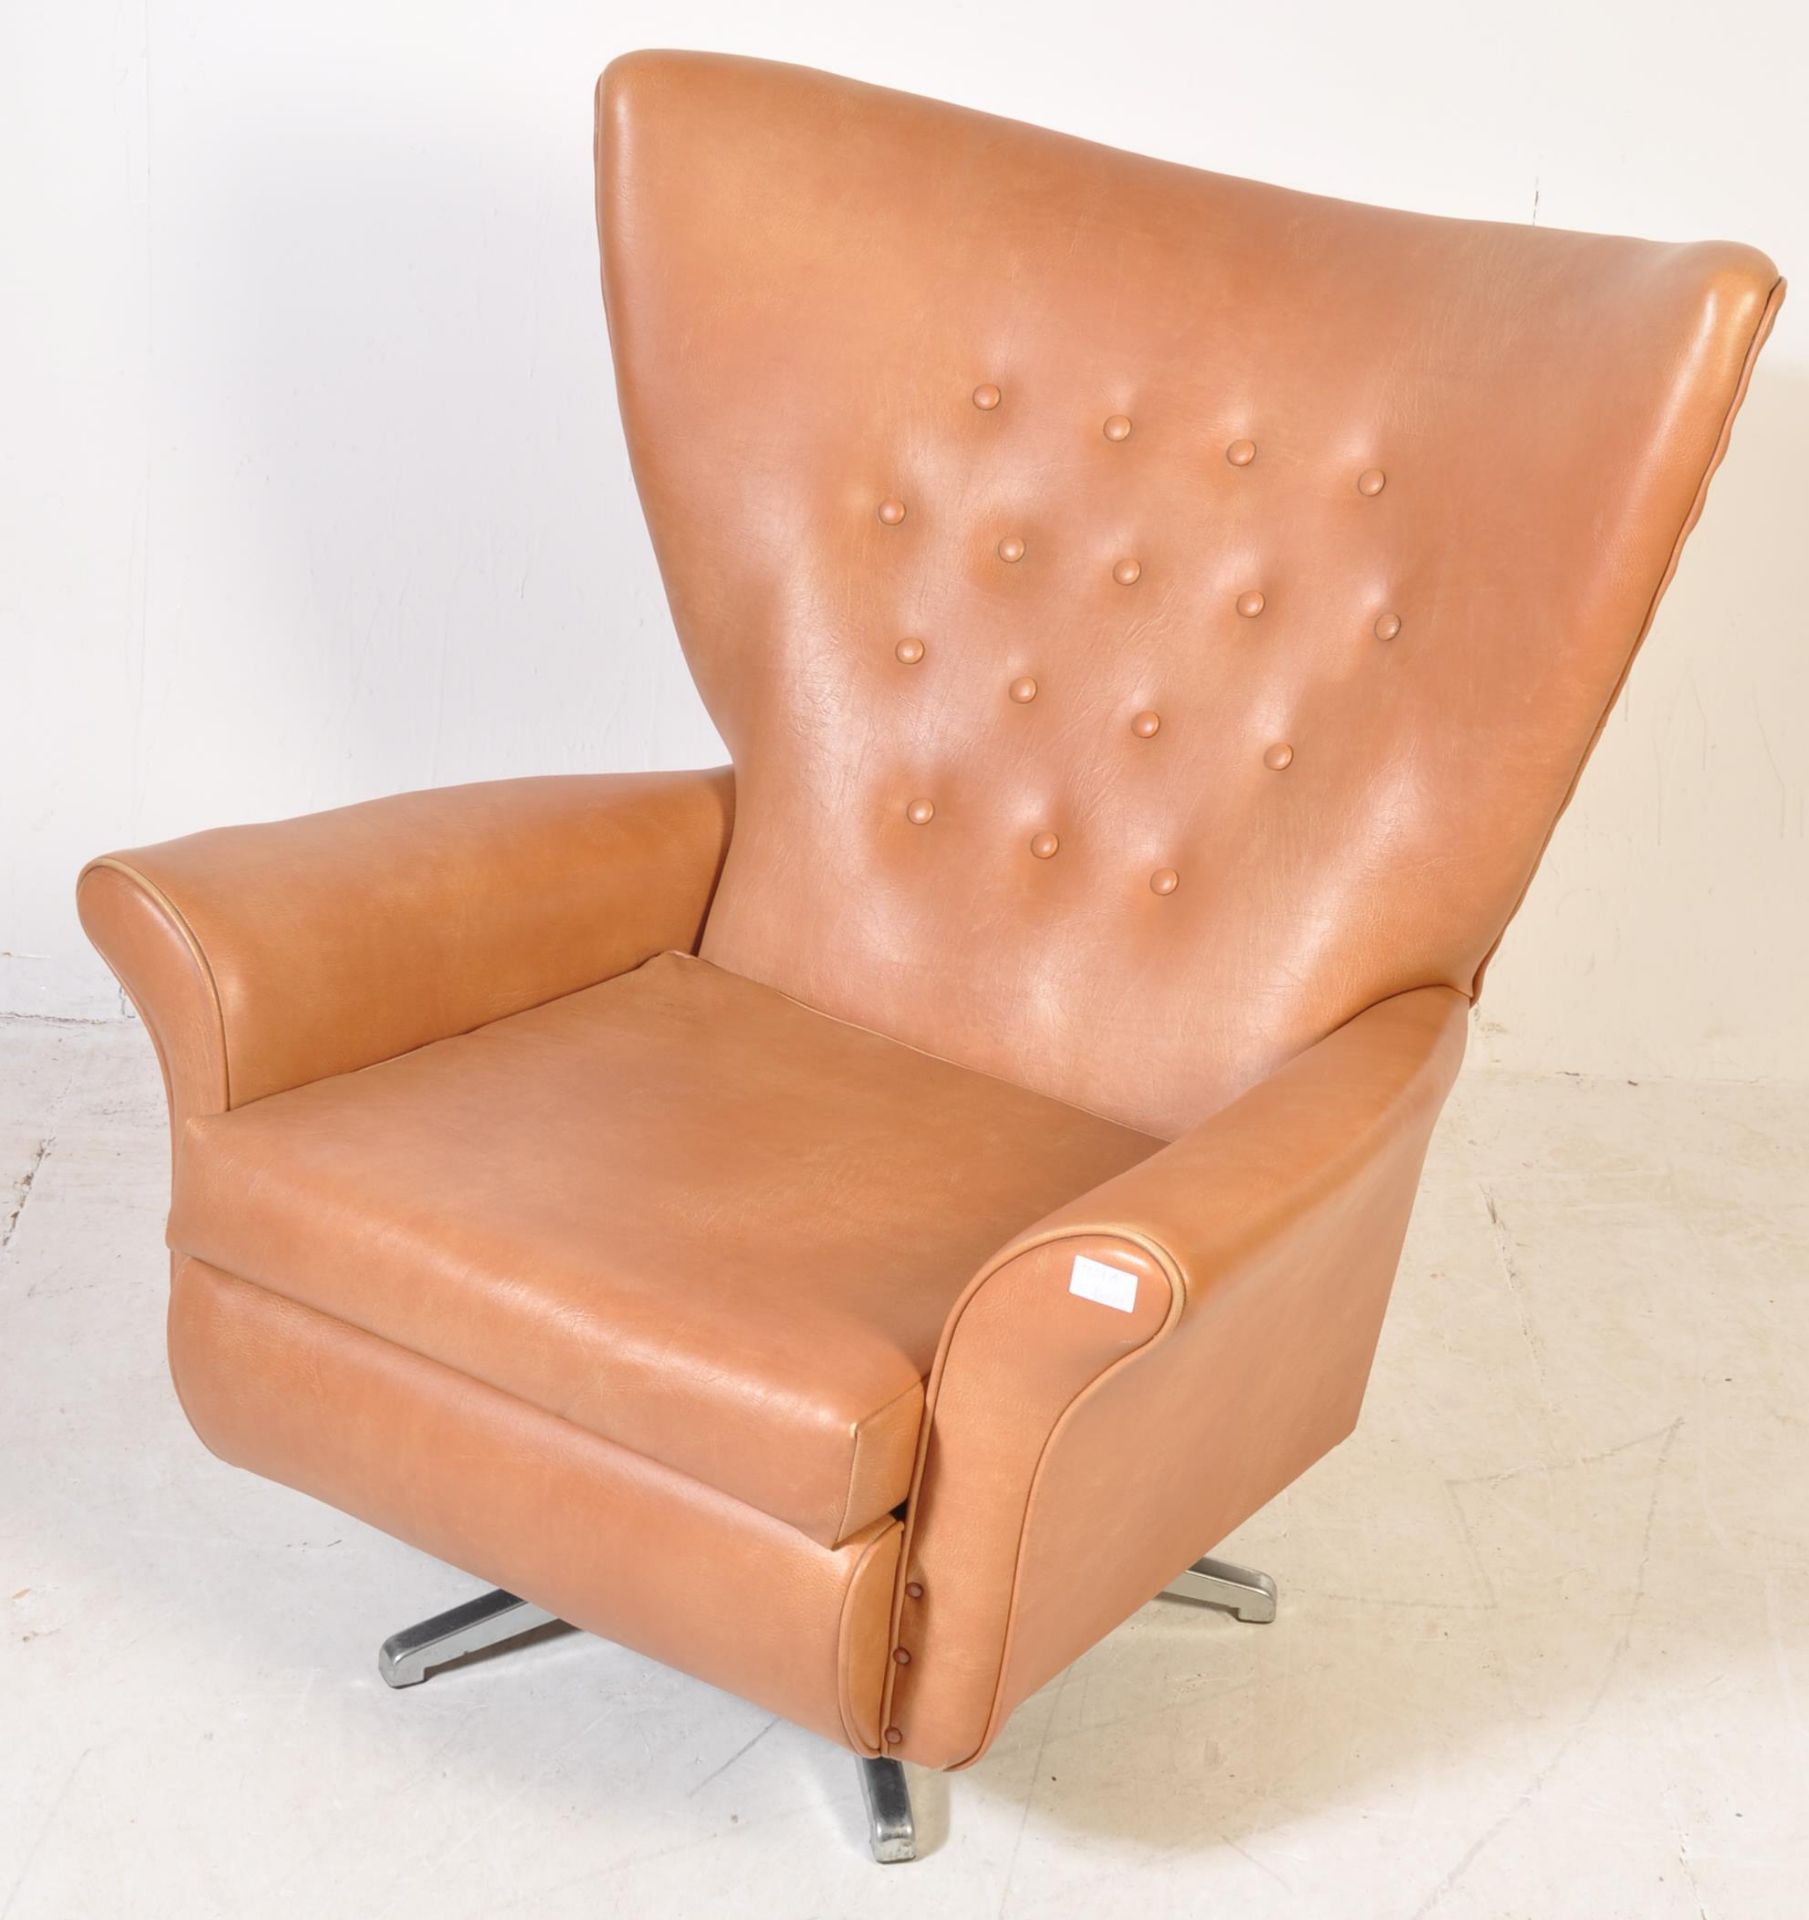 MID 20TH CENTURY WINGBACK ARMCHAIR / SWIVEL EASY CHAIR - Image 2 of 7